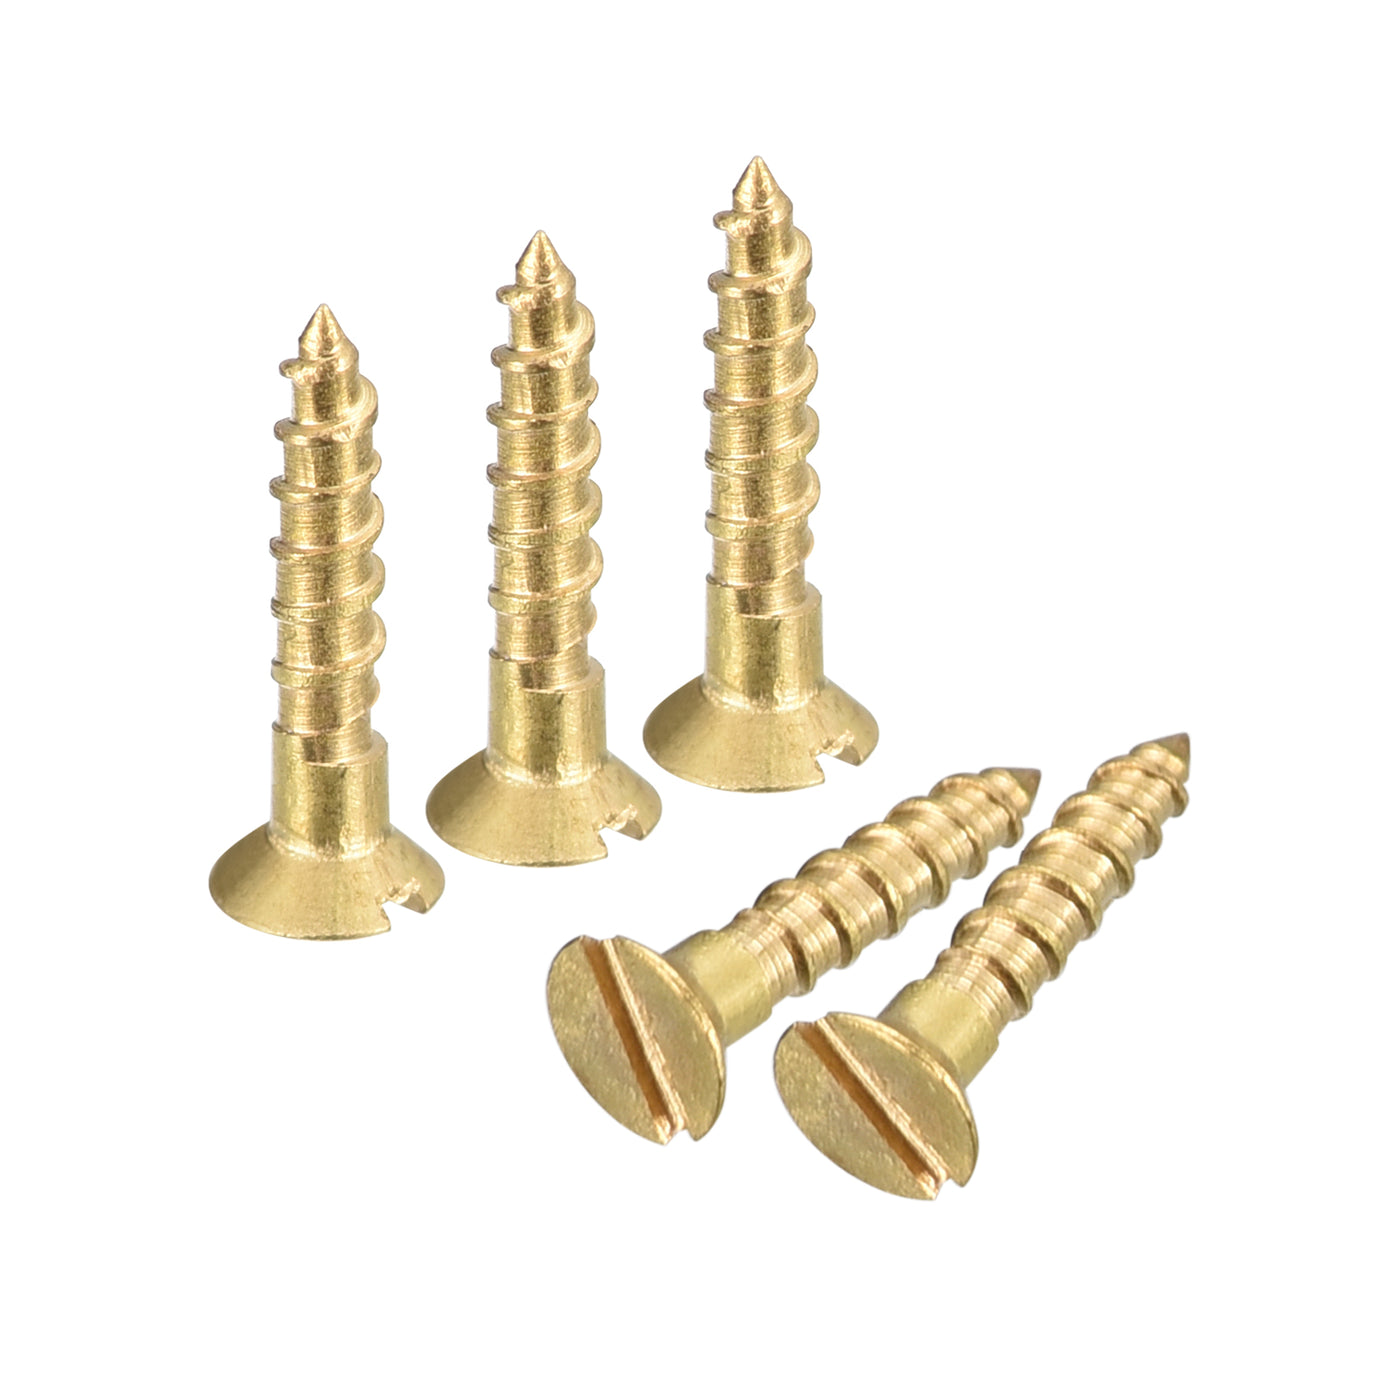 uxcell Uxcell 25Pcs M1.6 x 8mm Brass Slotted Drive Flat Head Wood Screws Self Tapping Screw